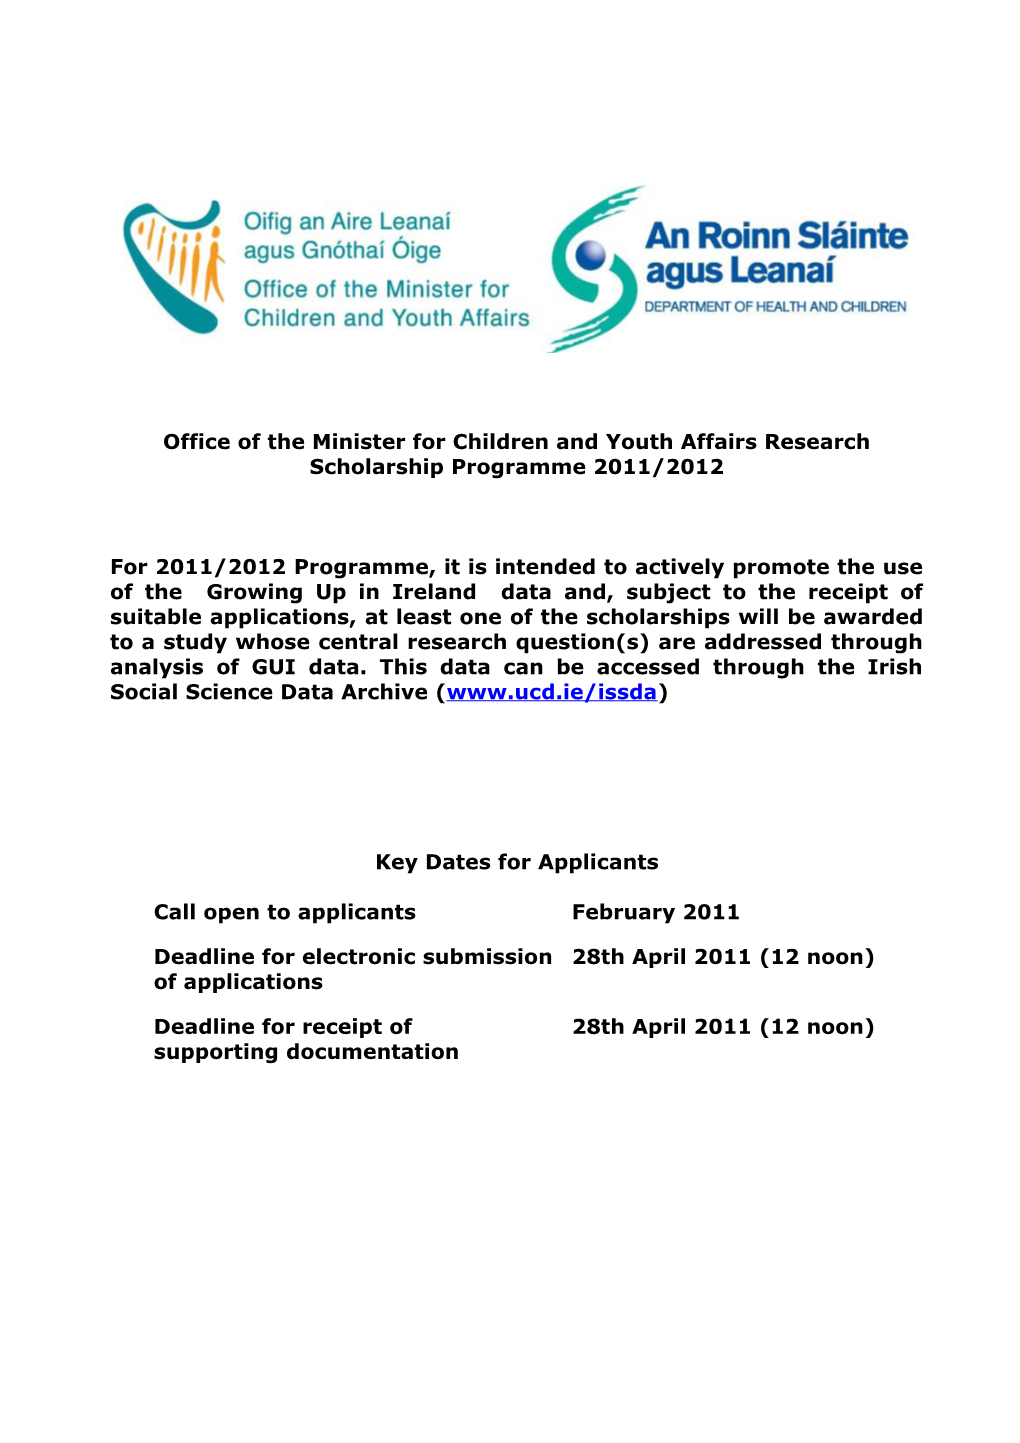 Office of the Minister for Children and Youth Affairs Research Scholarship Programme 2011/2012